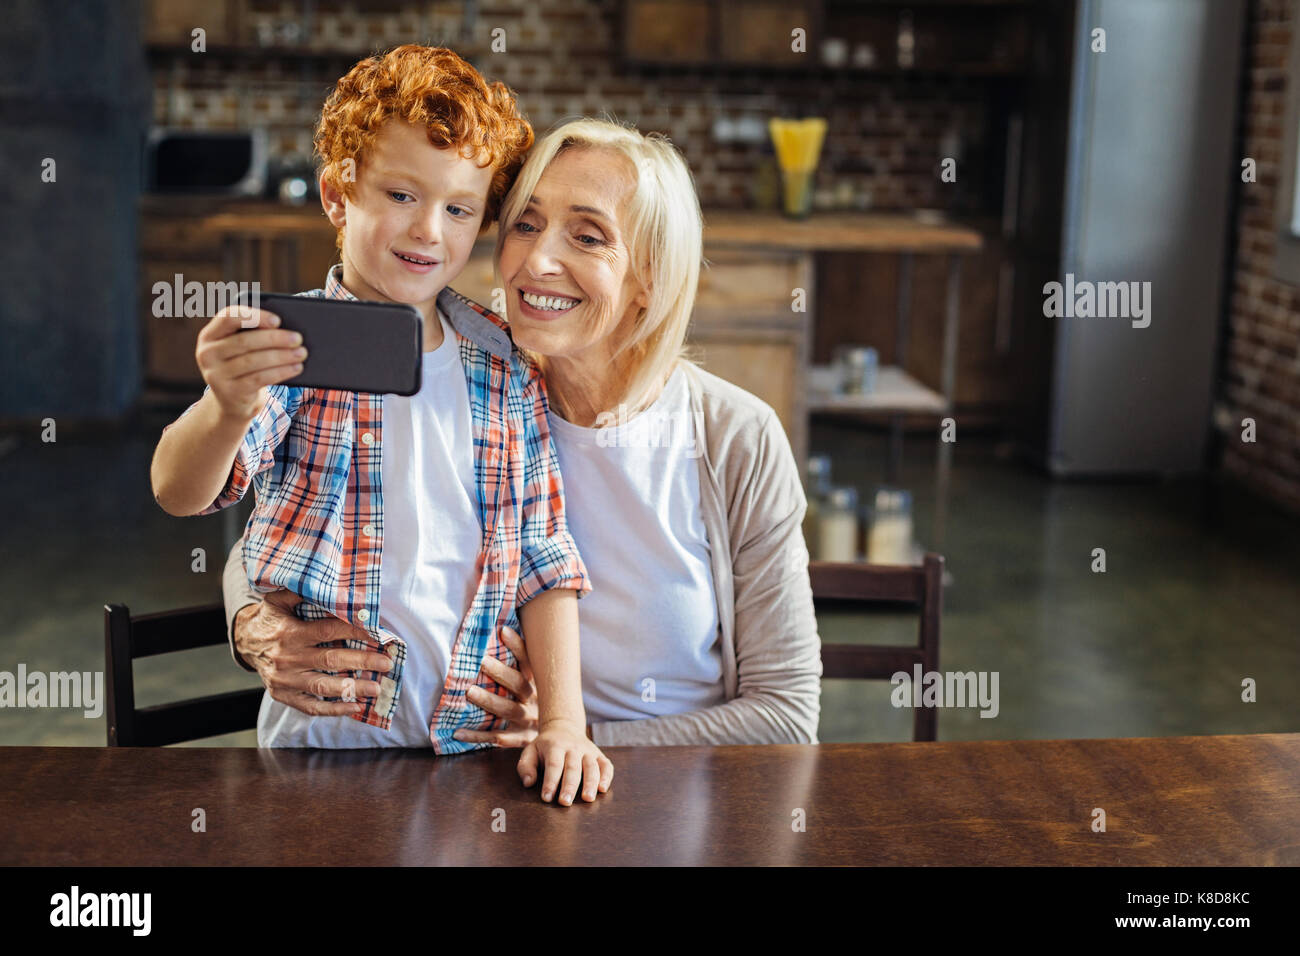 Adorable redhead kid taking selfie with granny Stock Photo